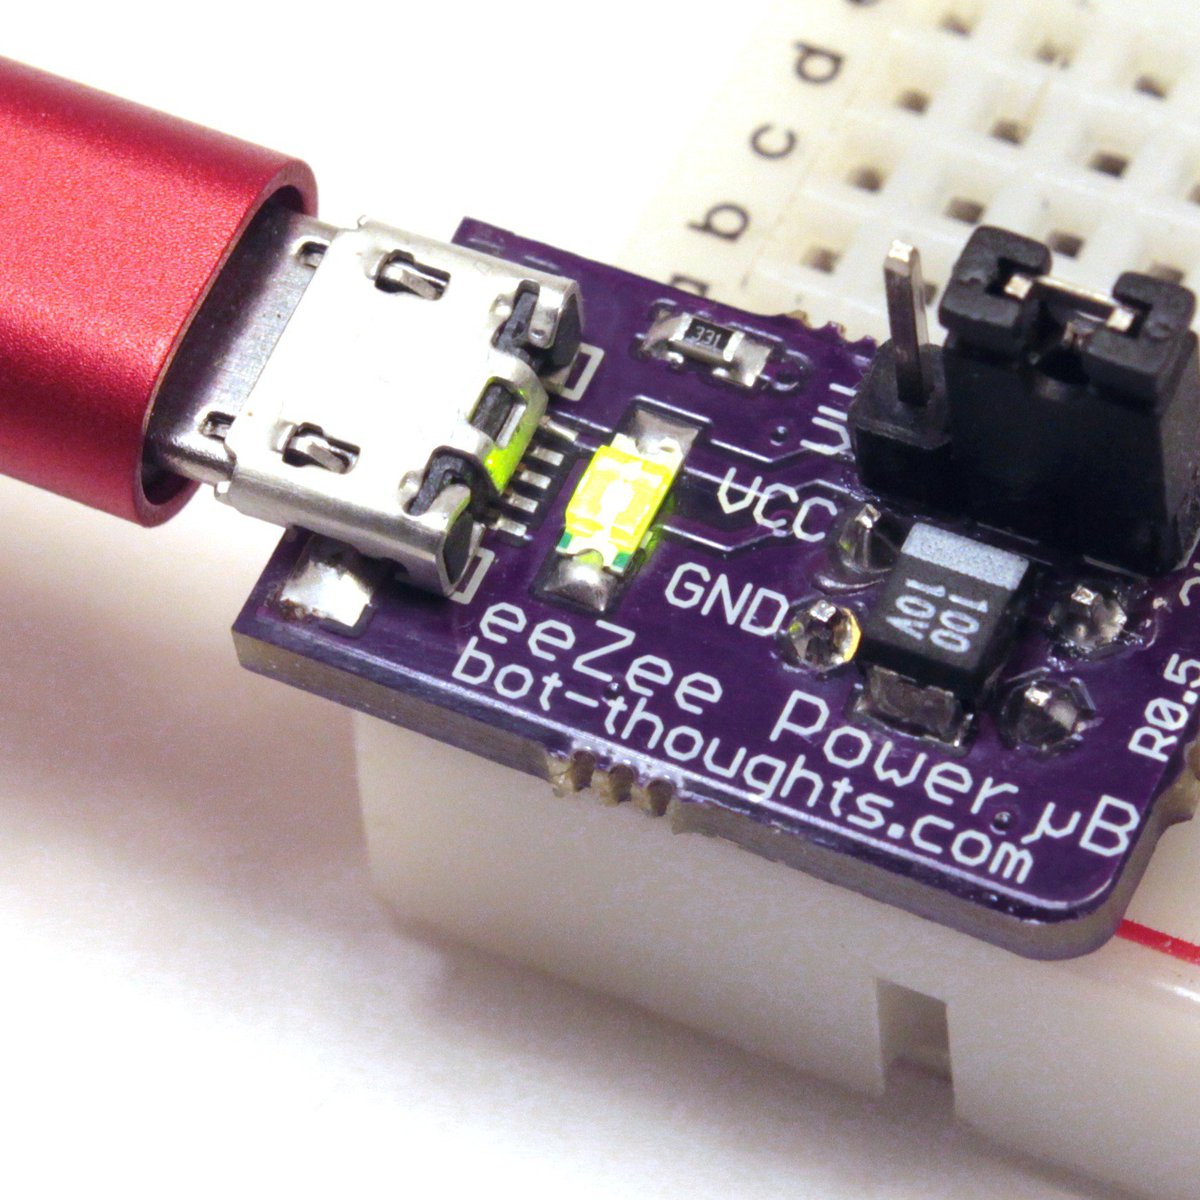  Customer reviews: VDBX.io Micro-USB 5v Breakout for Breadboard  - Original USB-BD Power Supply & Prototyping Tool with OTG Switch Data